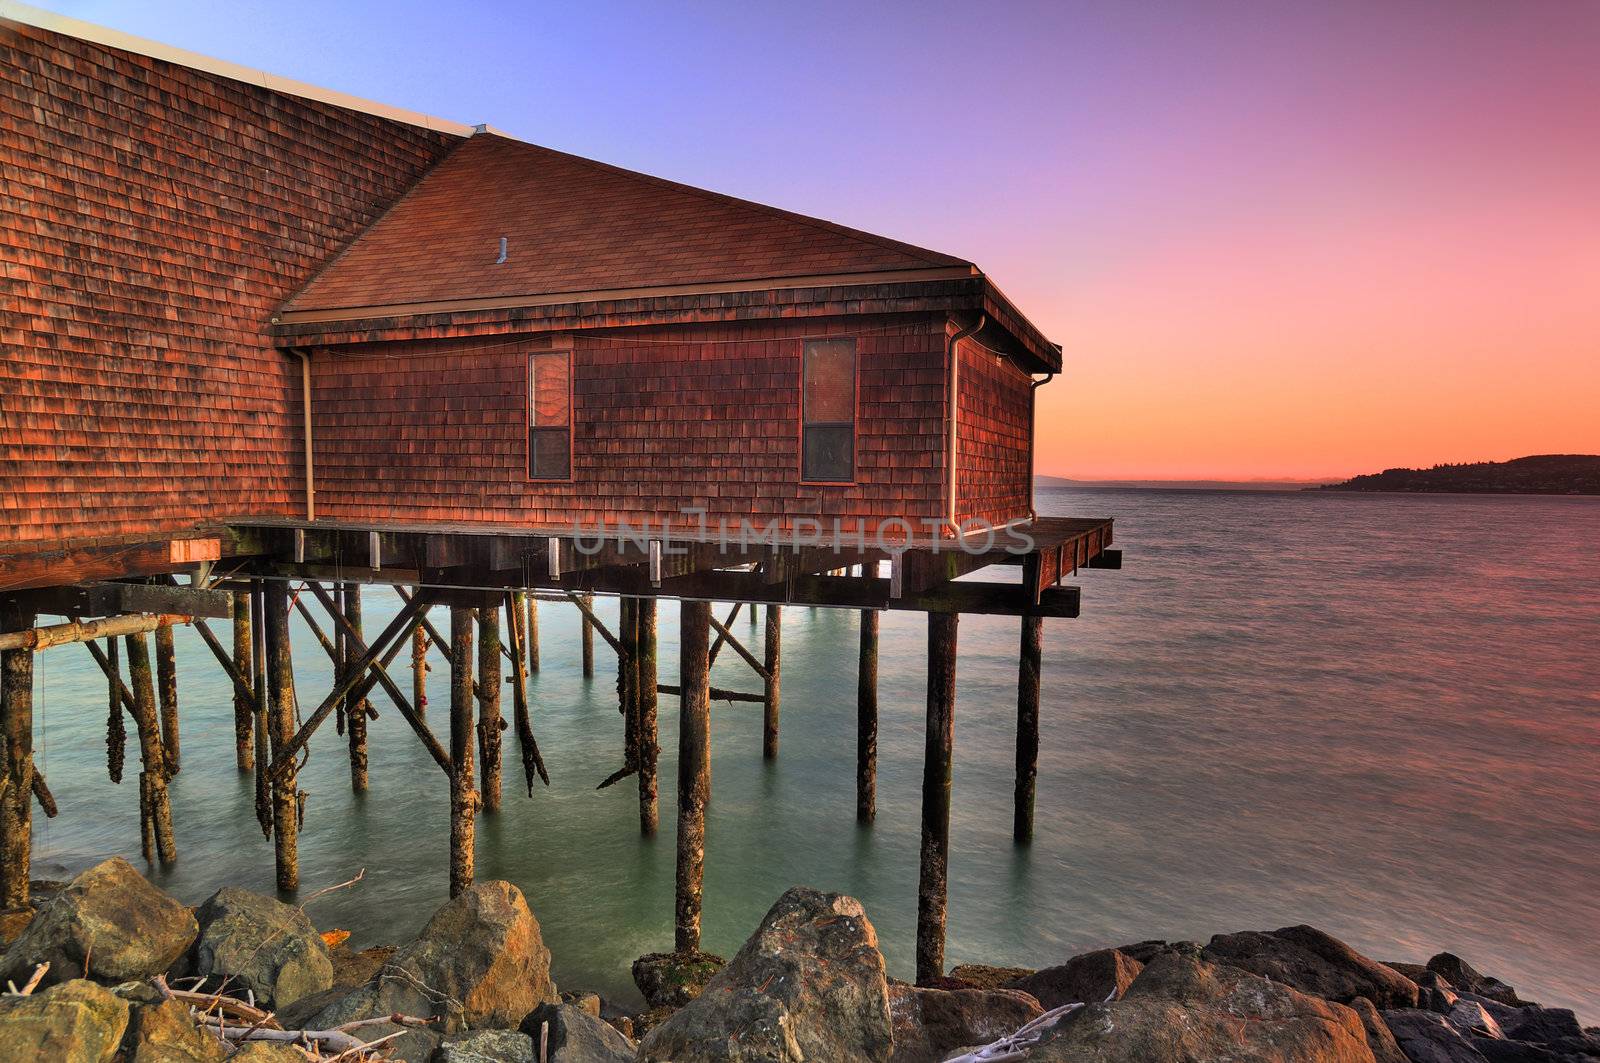 Beautiful old tavern over waterfront at sunrise HDR image